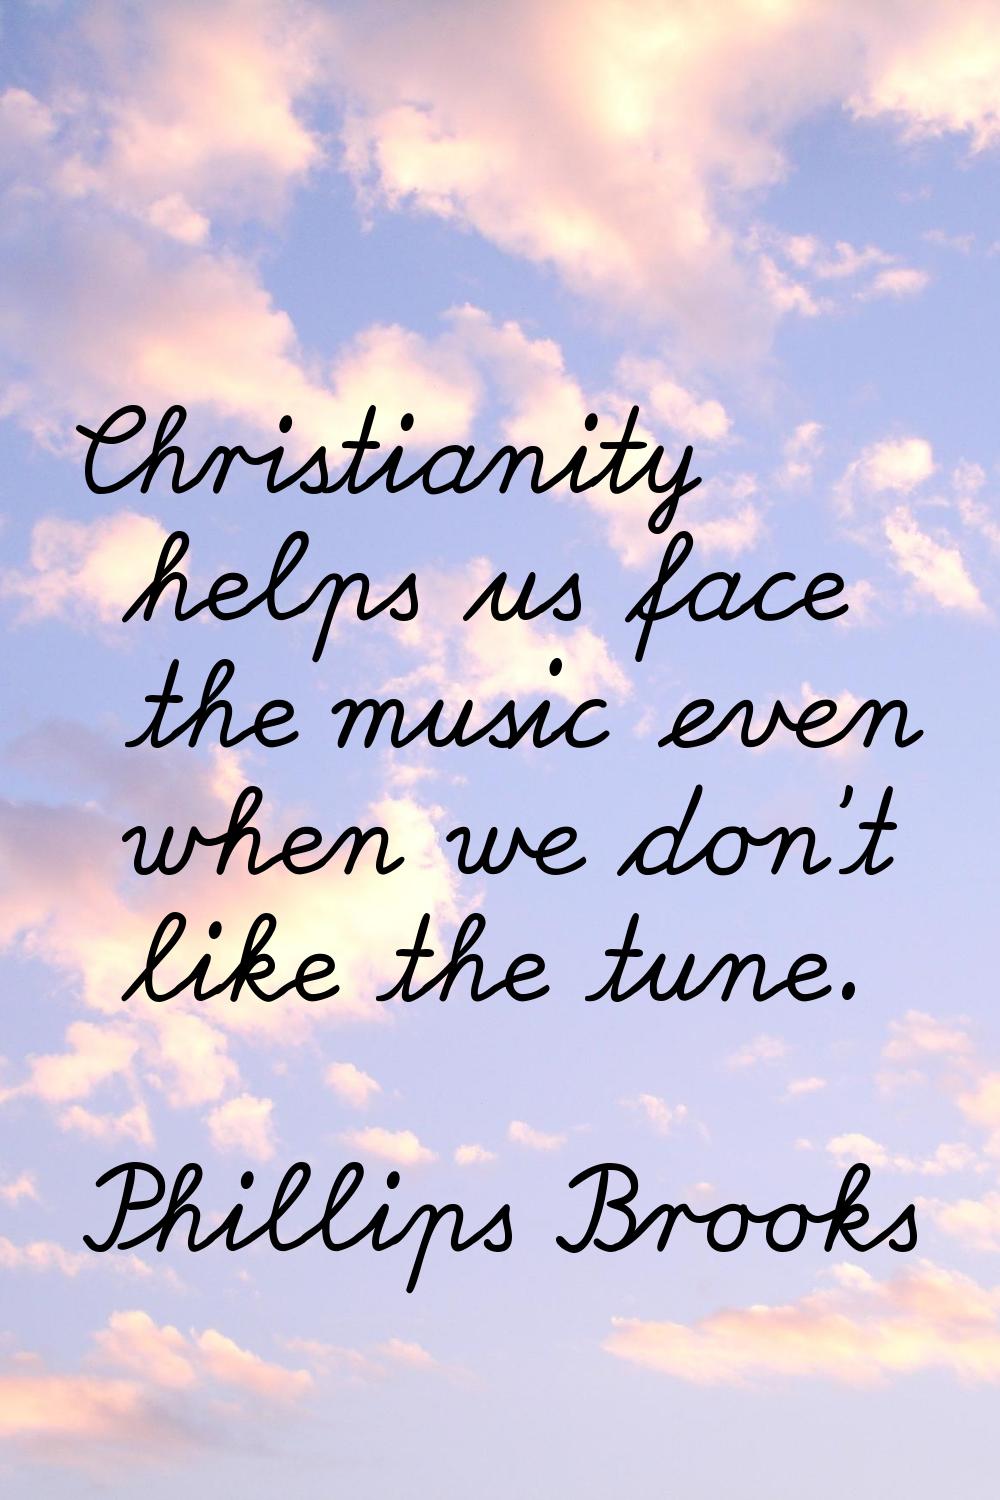 Christianity helps us face the music even when we don't like the tune.